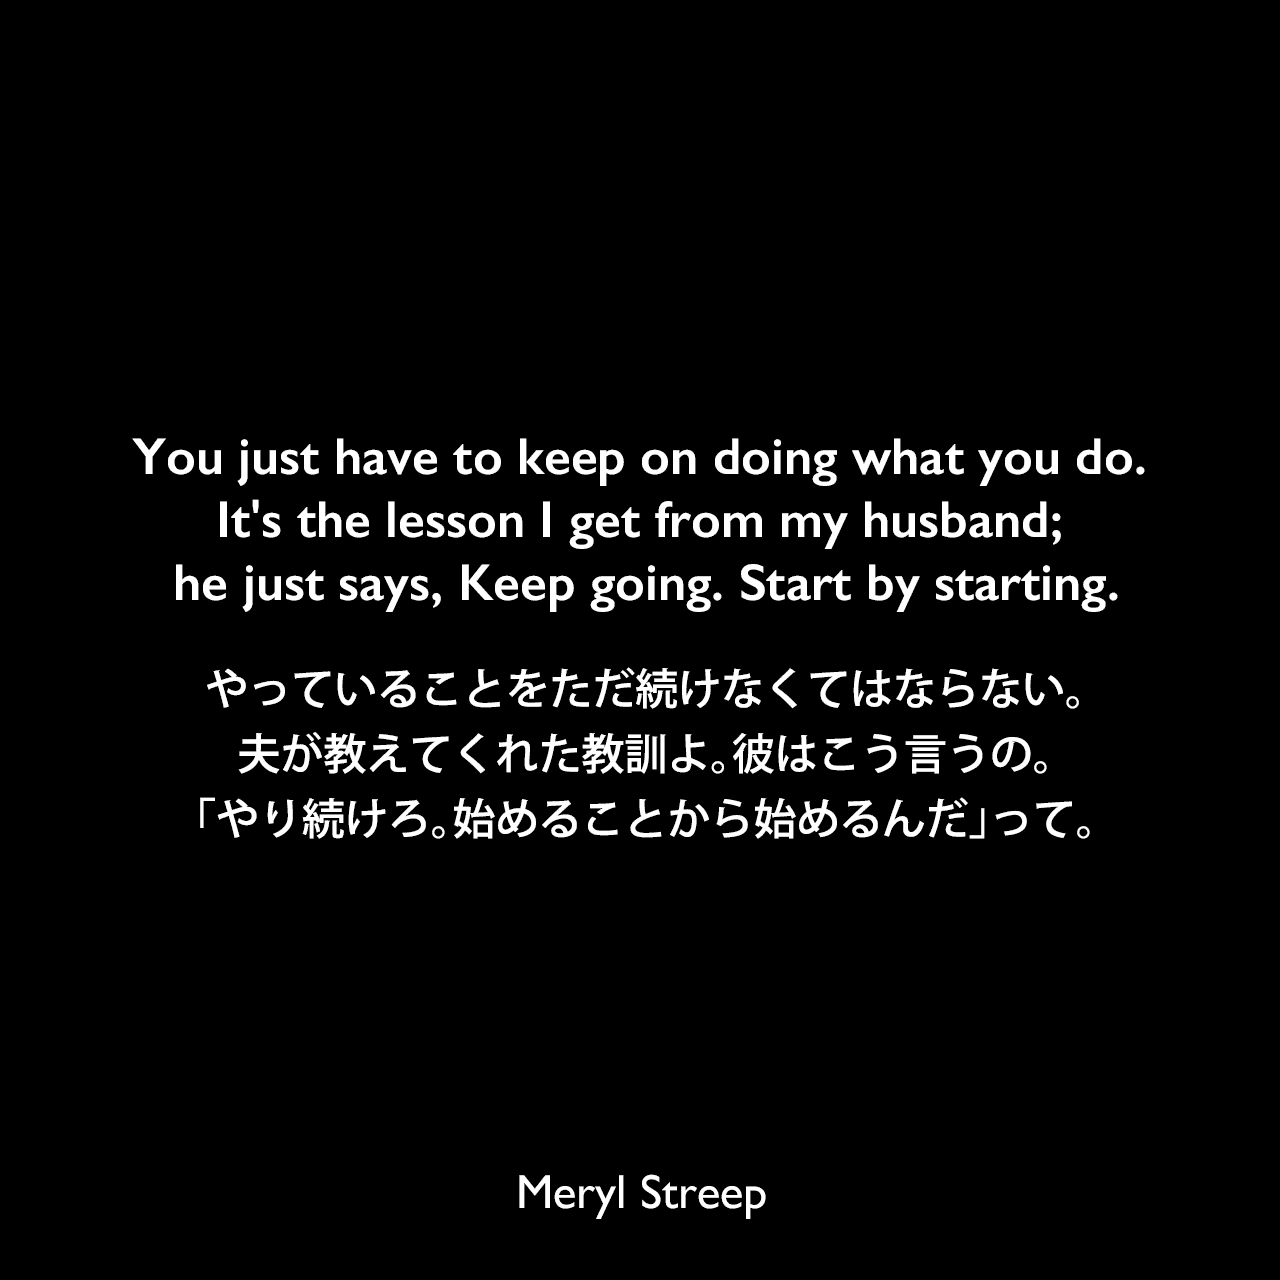 You just have to keep on doing what you do. It's the lesson I get from my husband; he just says, Keep going. Start by starting.やっていることをただ続けなくてはならない。夫が教えてくれた教訓よ。彼はこう言うの。「やり続けろ。始めることから始めるんだ」って。Meryl Streep